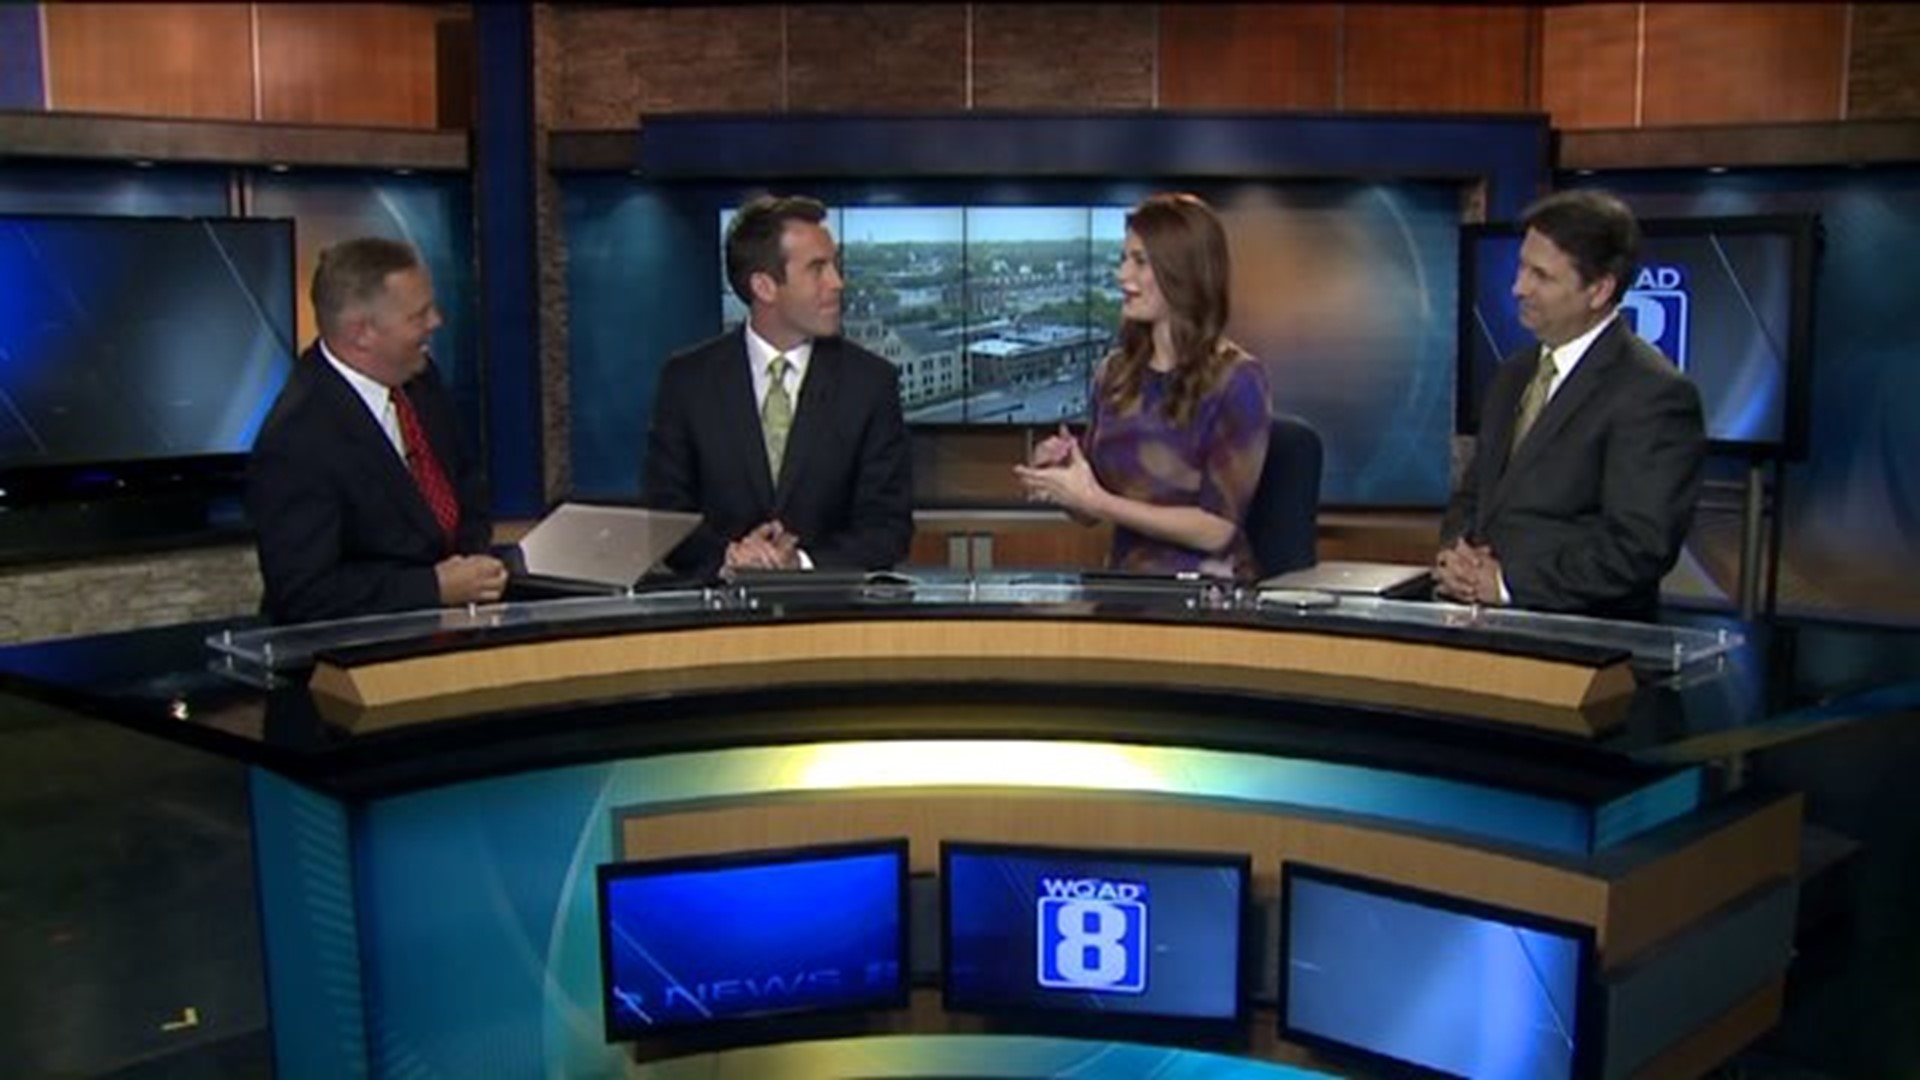 News 8 staff says Good bye and Good luck to Jason Fechner